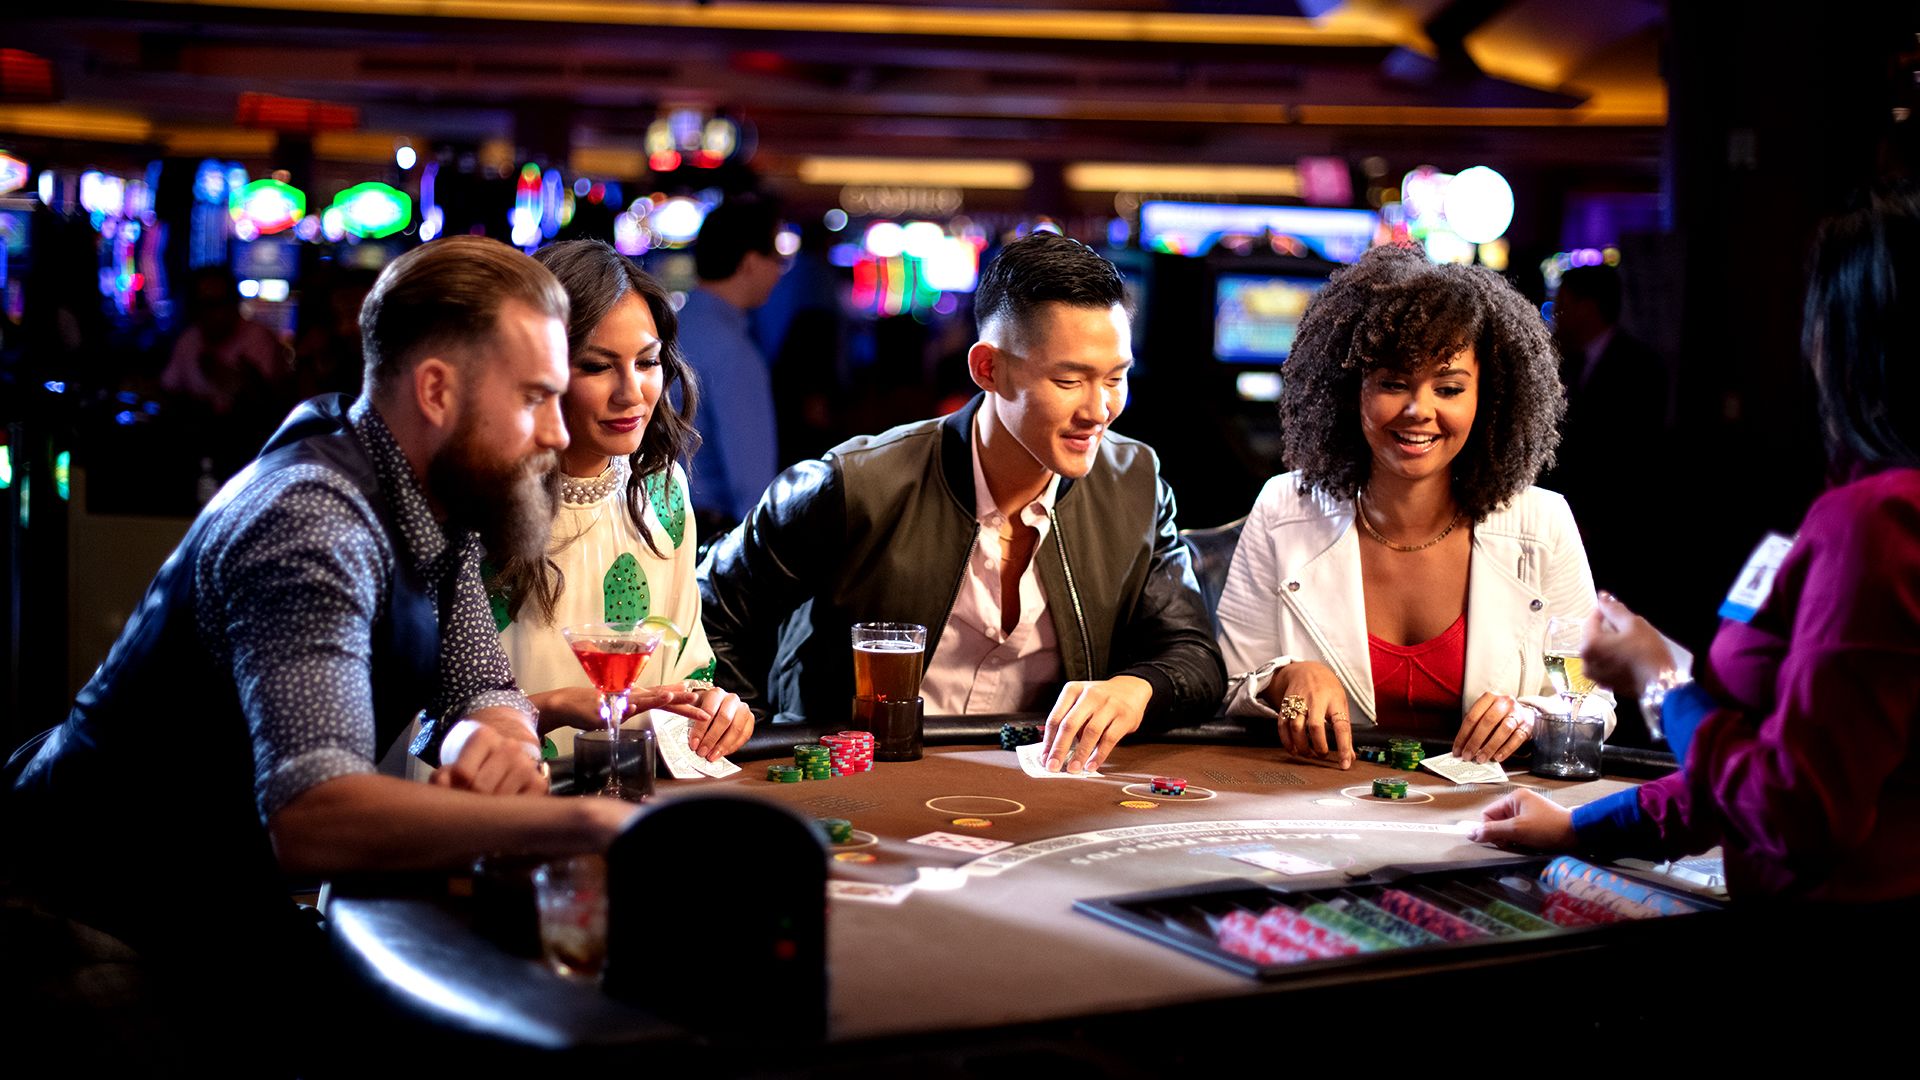 Loyalty Pays Off: Selecting a Casino Site with Loyalty Programs and VIP Clubs